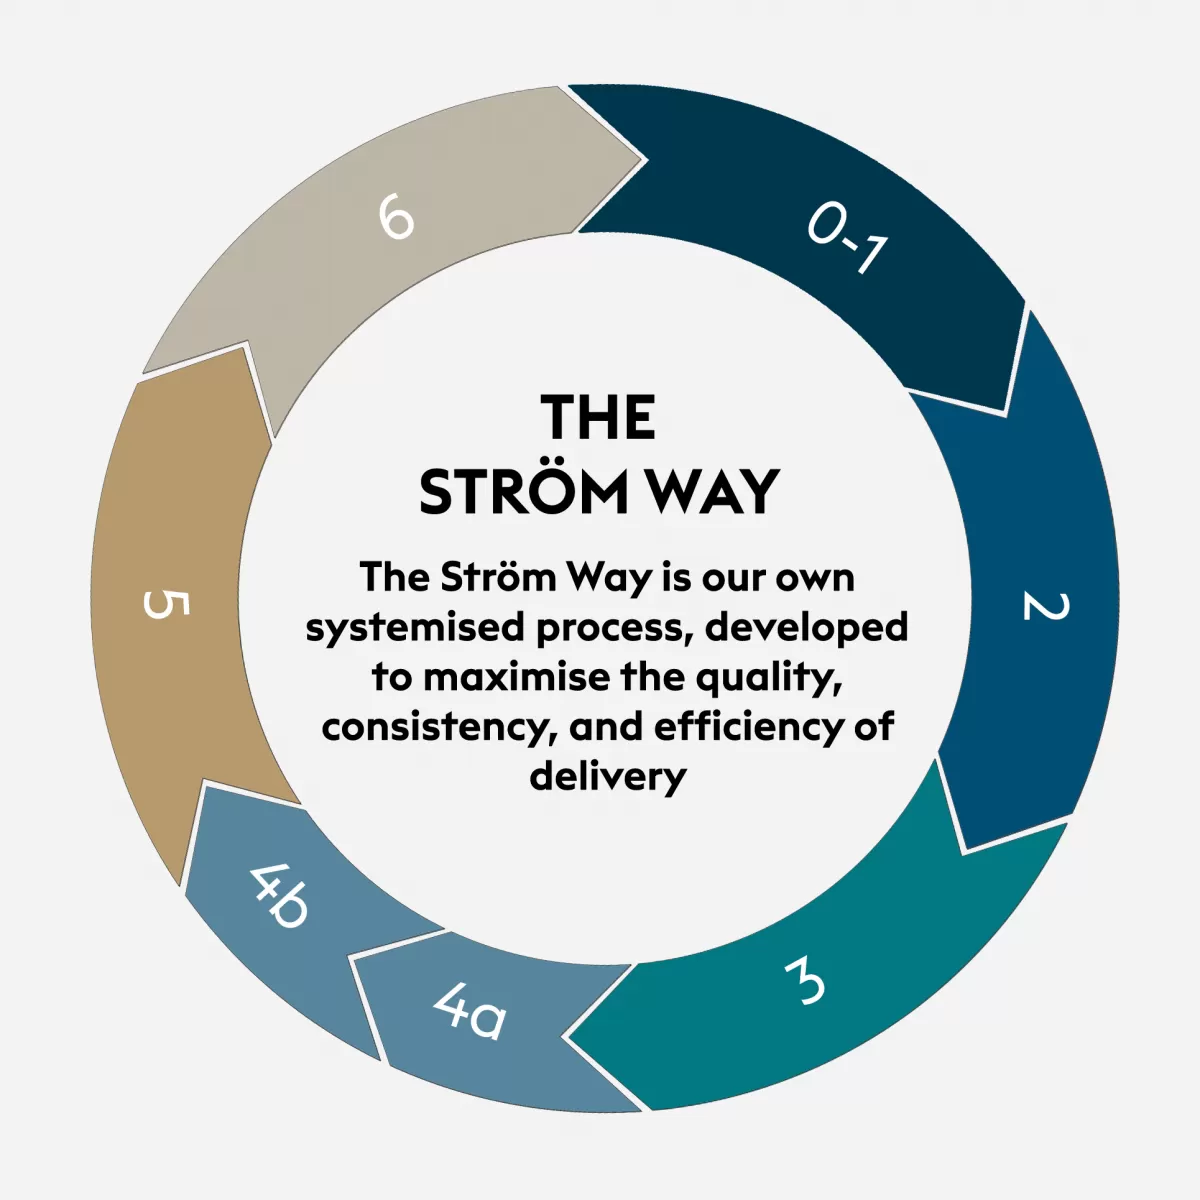 THE STRÖM WAY – The Ström Way is our own systemised process, developed to maximise the quality, consistency, and efficiency of delivery